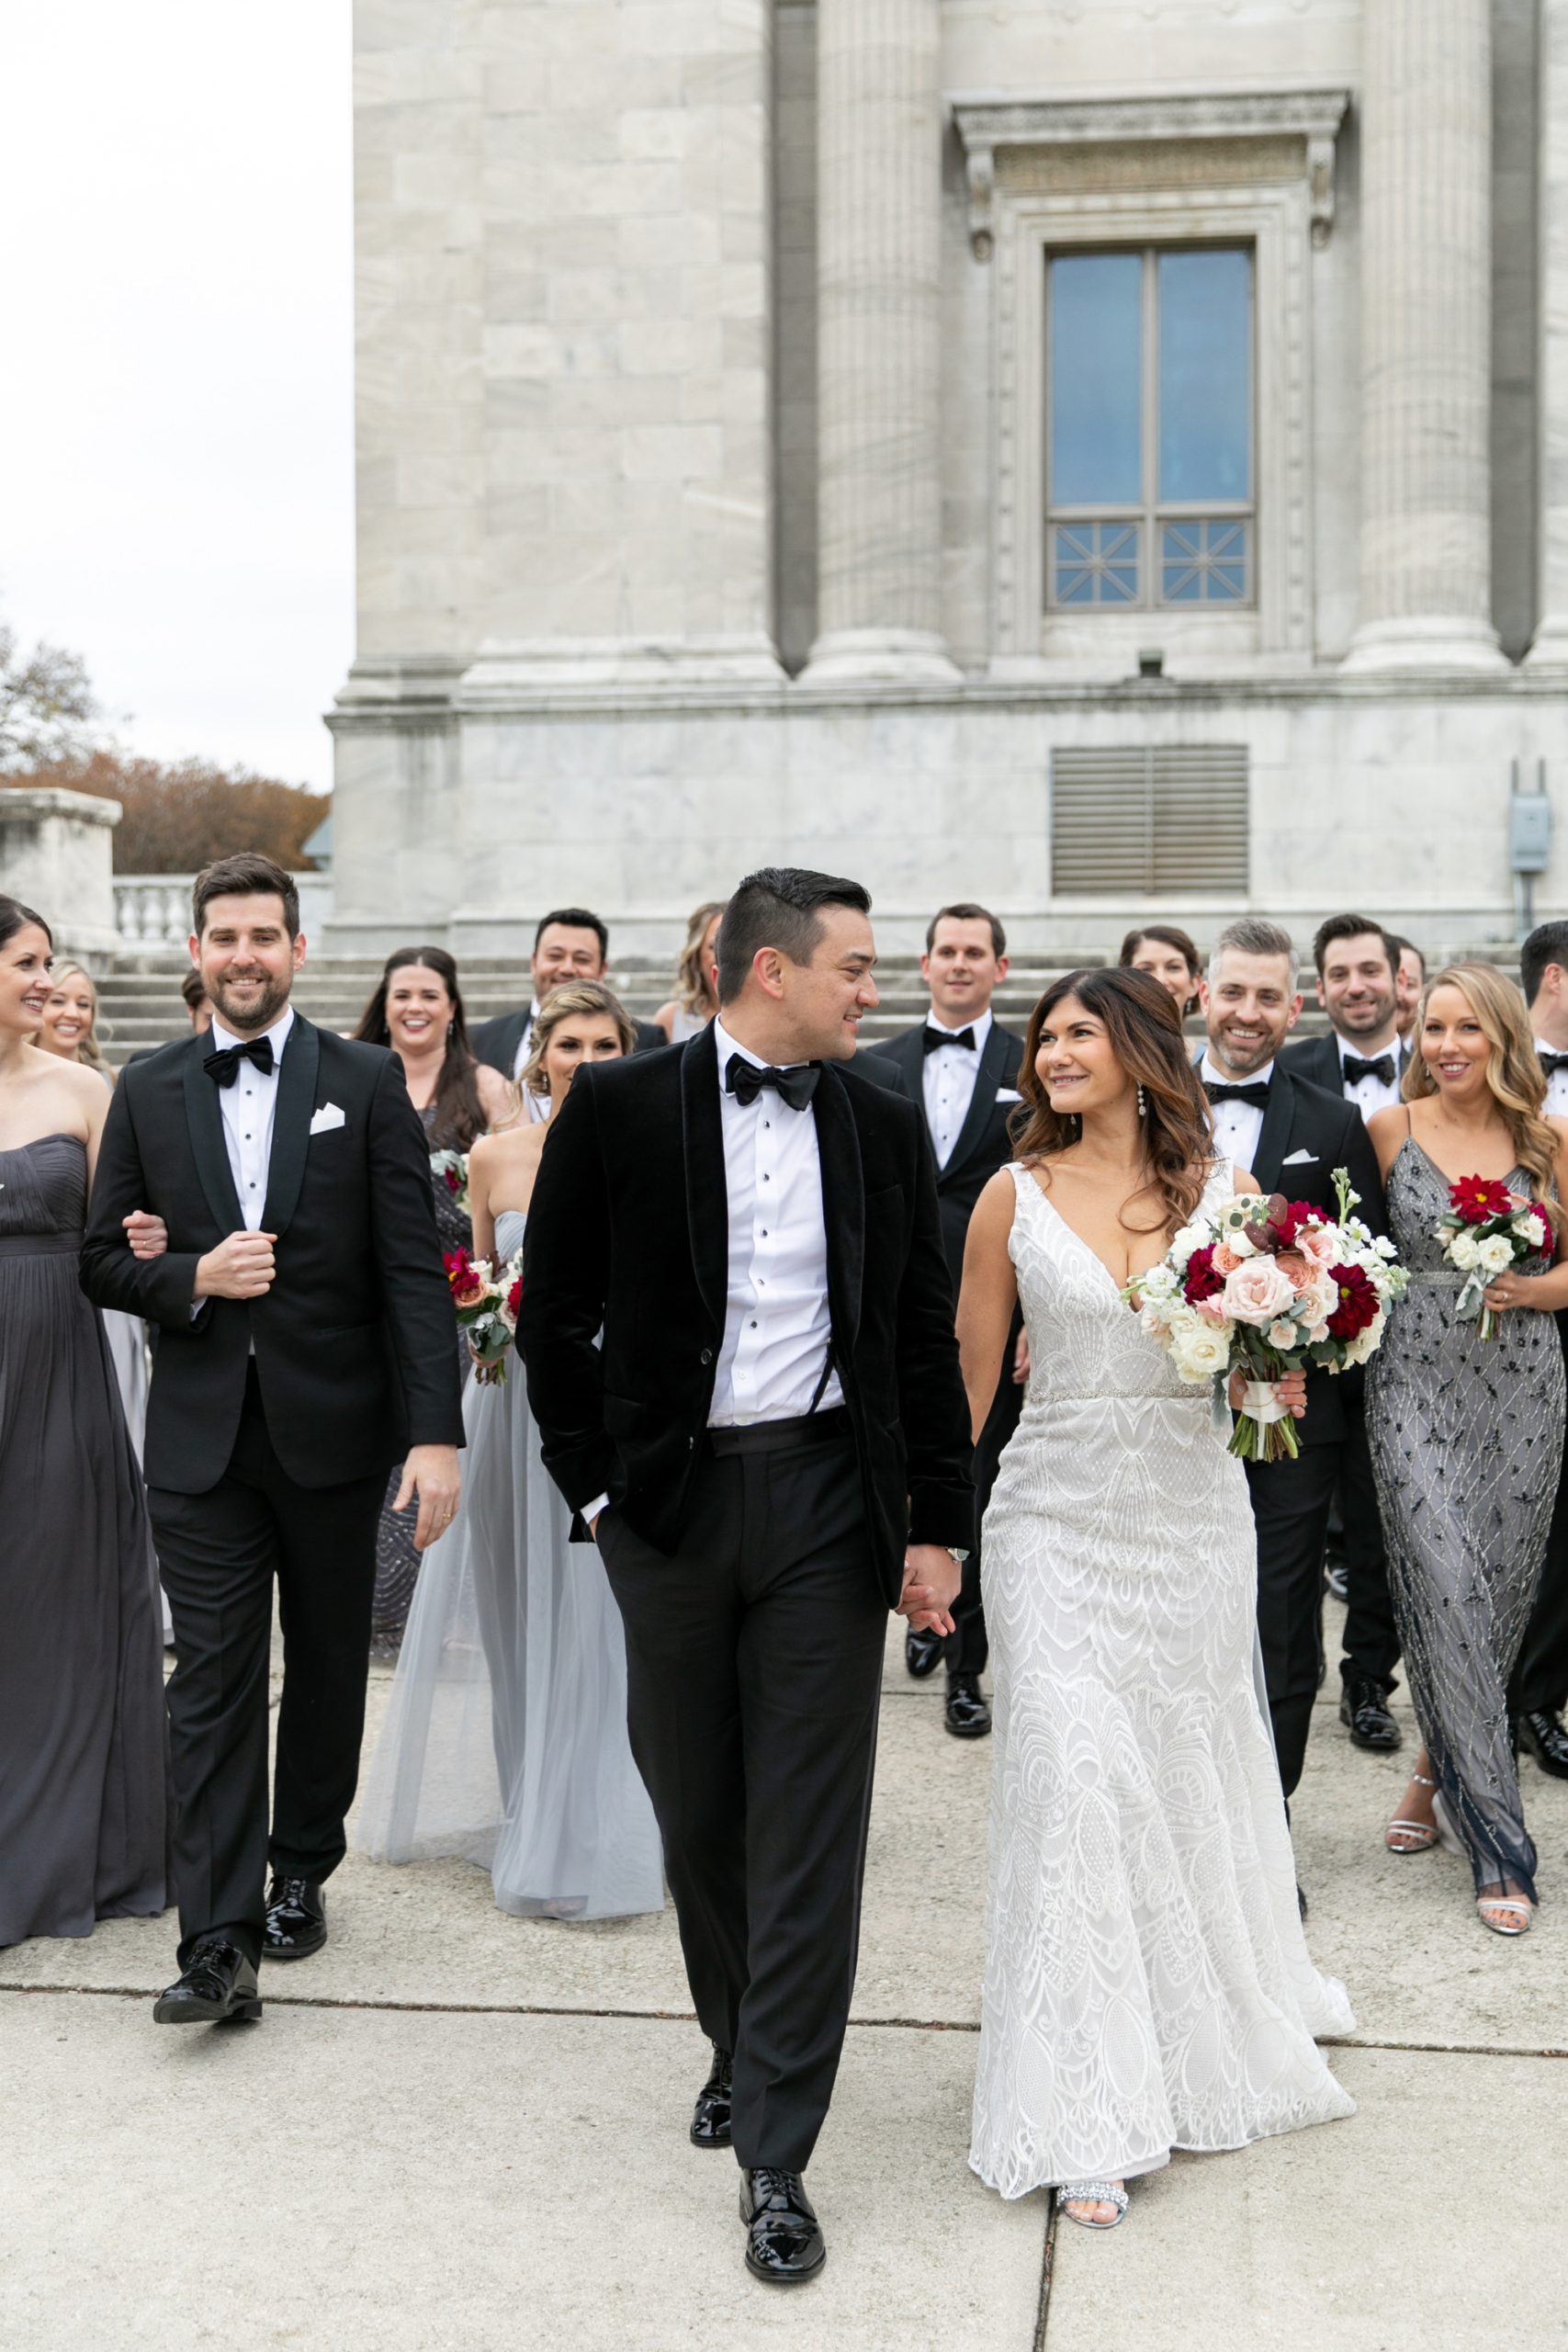 the bridal party posed for downtown Chicago wedding photos